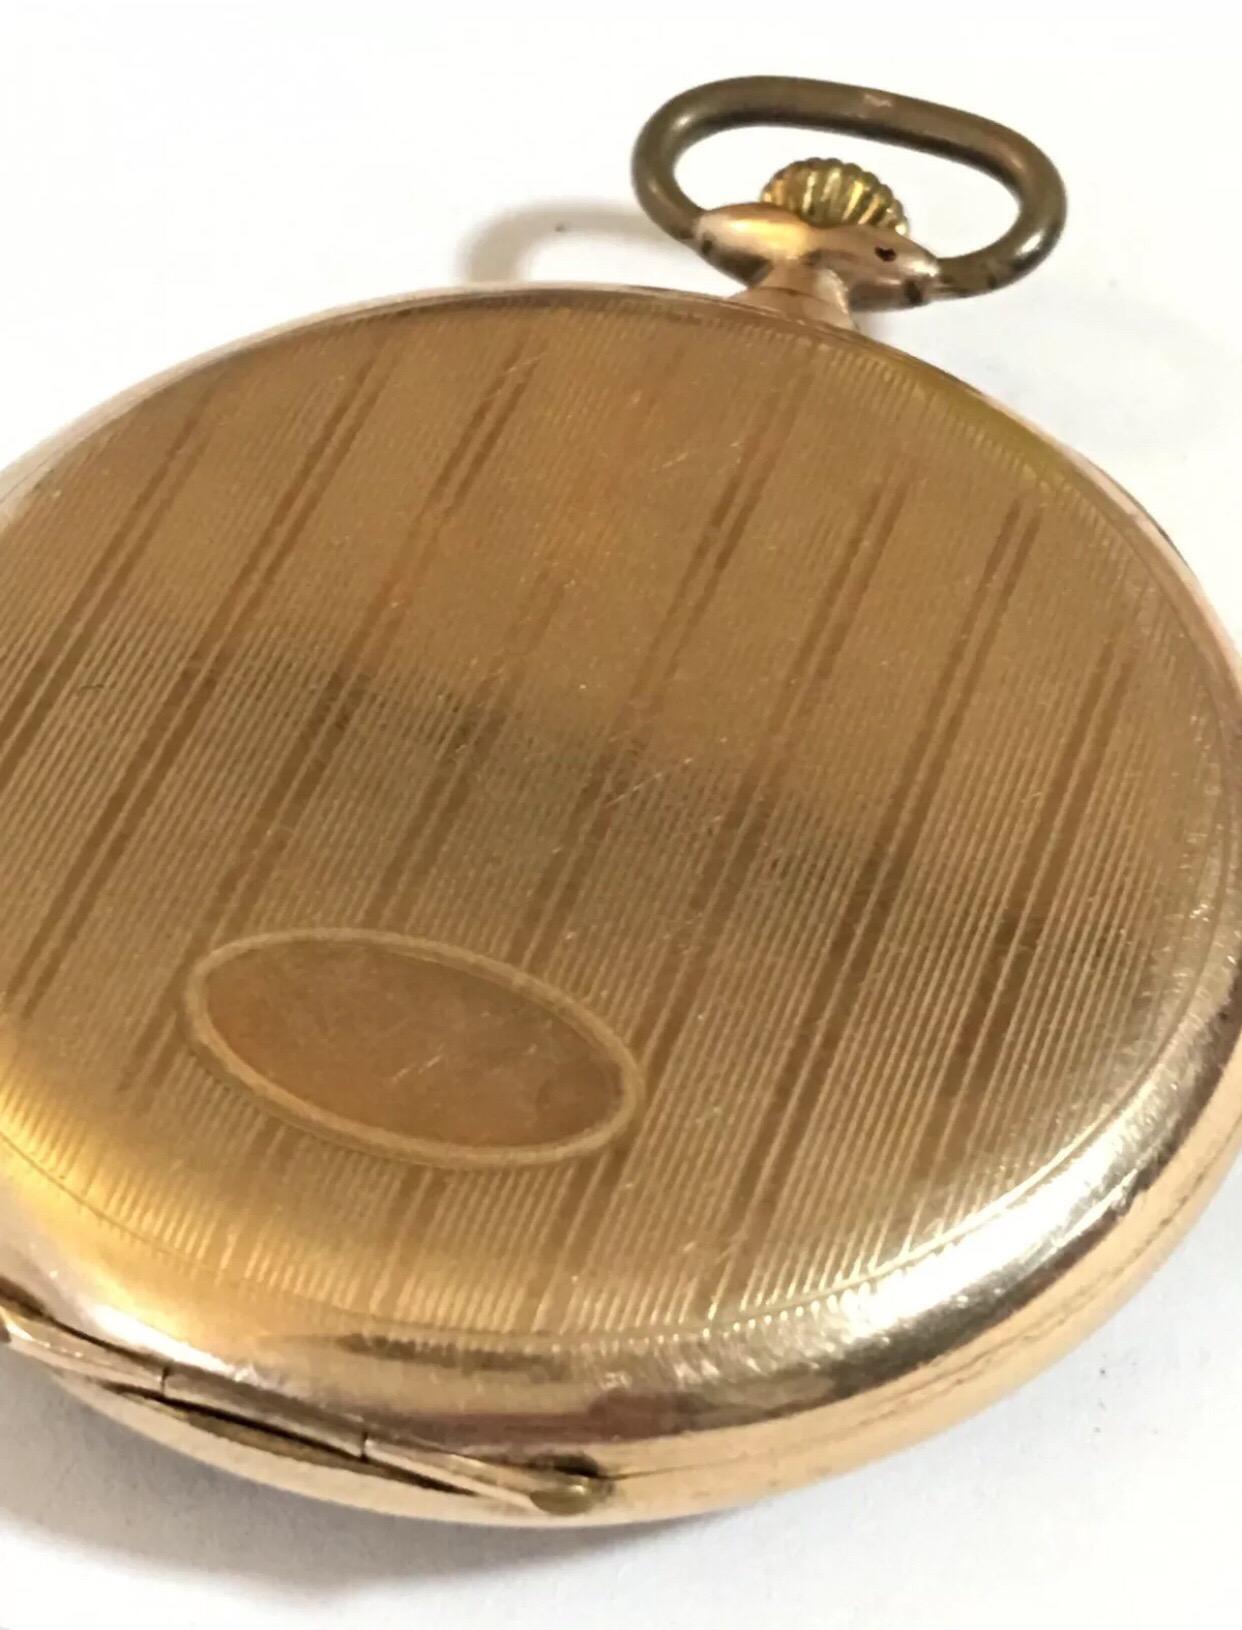 Gold-Plated Cyma Dress Pocket Watch For Sale 6